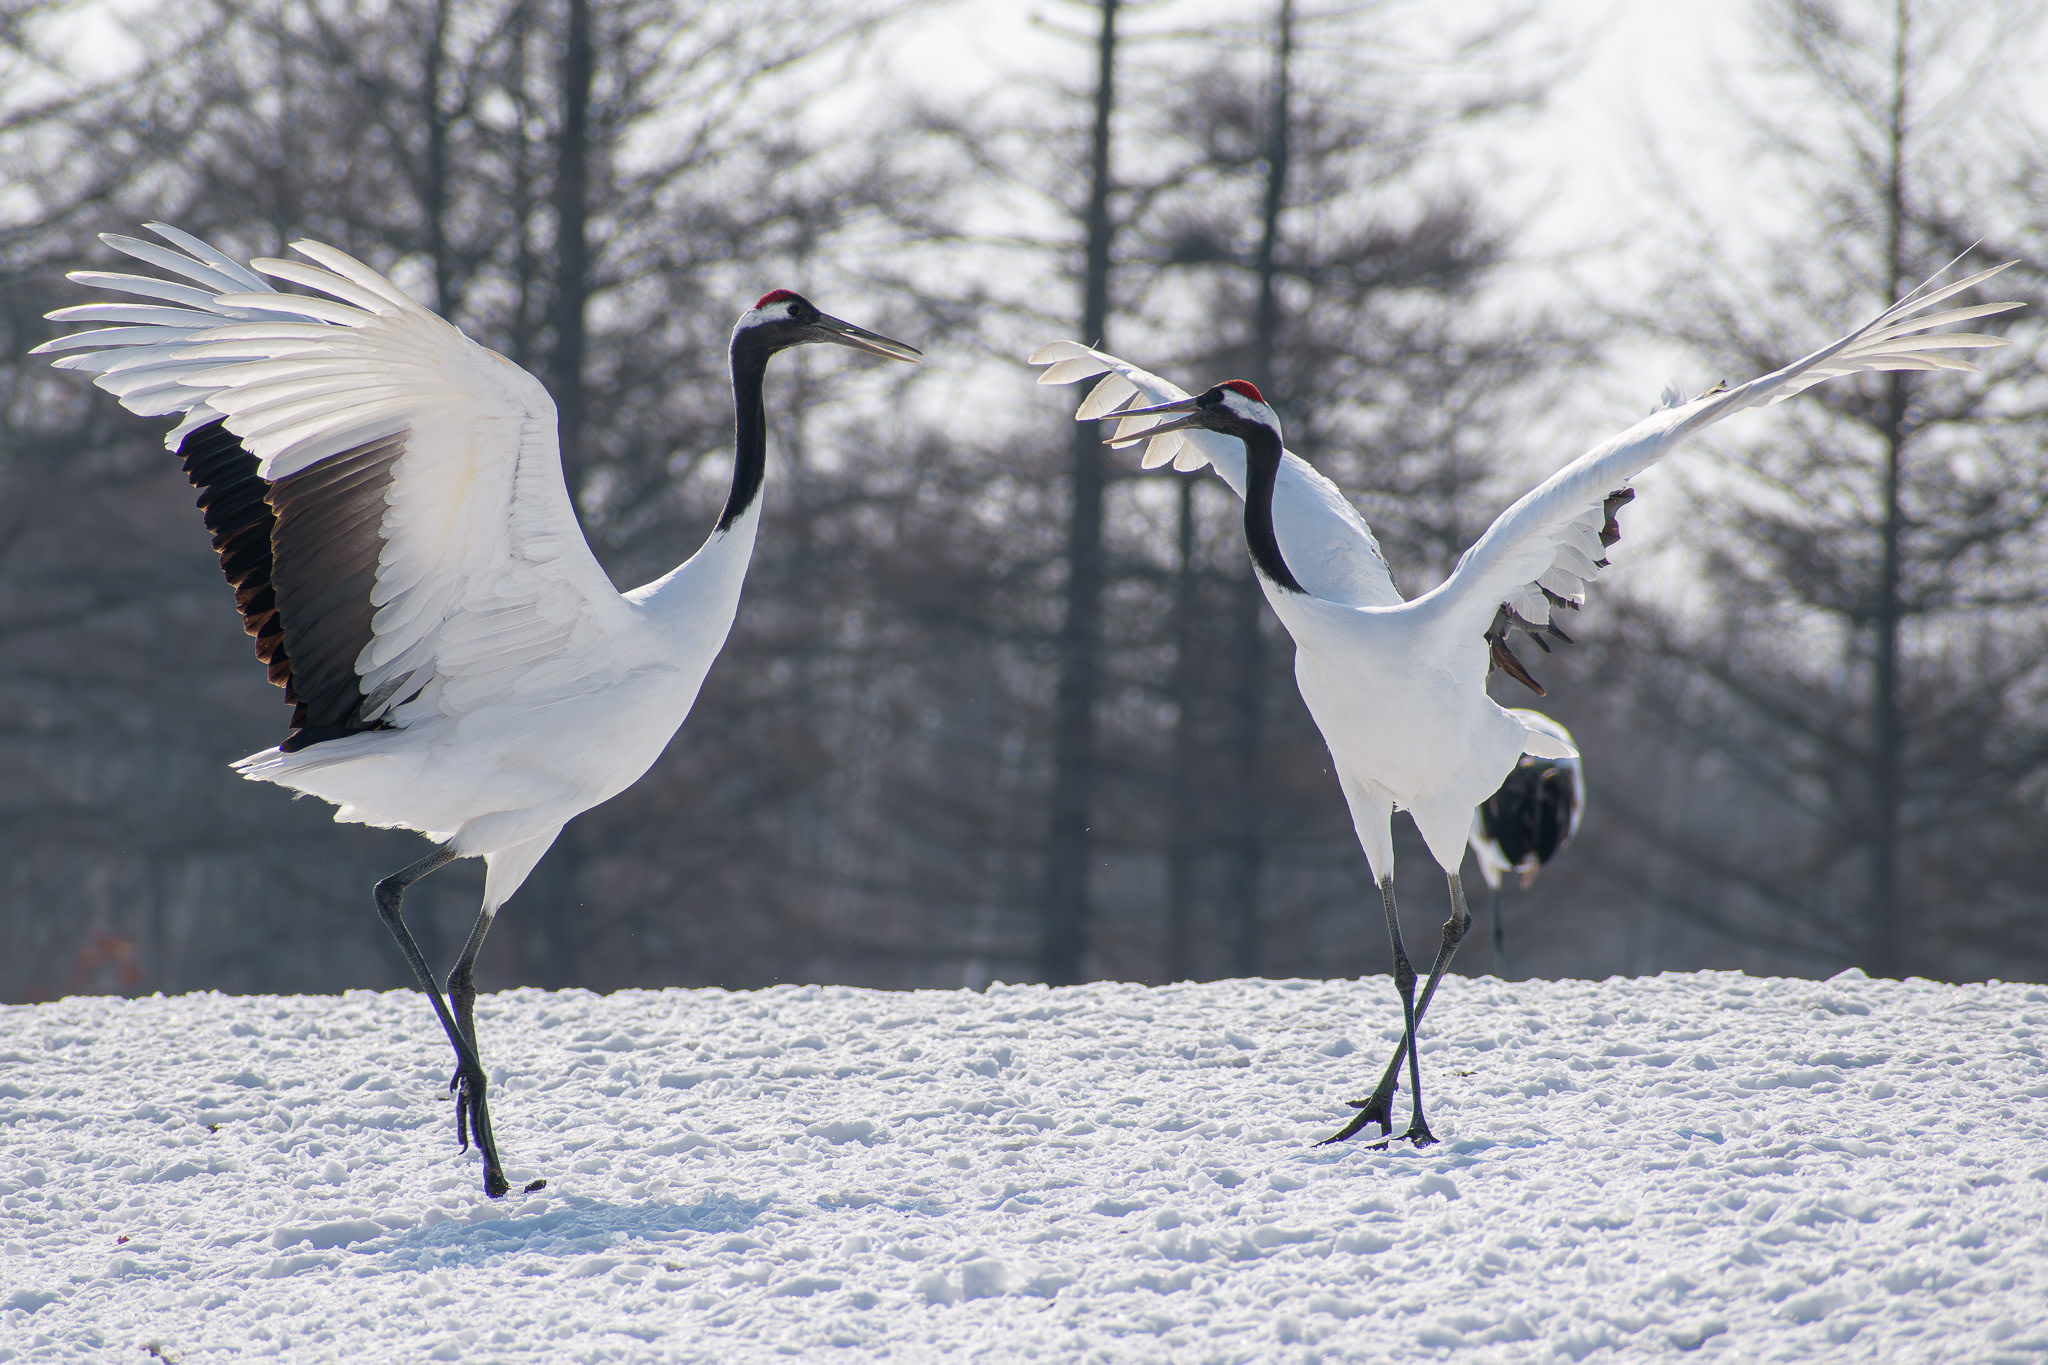 Two Red-crowned Cranes perform a pairing dance in the Kushiro-Shitsugen National Park. The birds stand on snow facing each other with their wings raised.